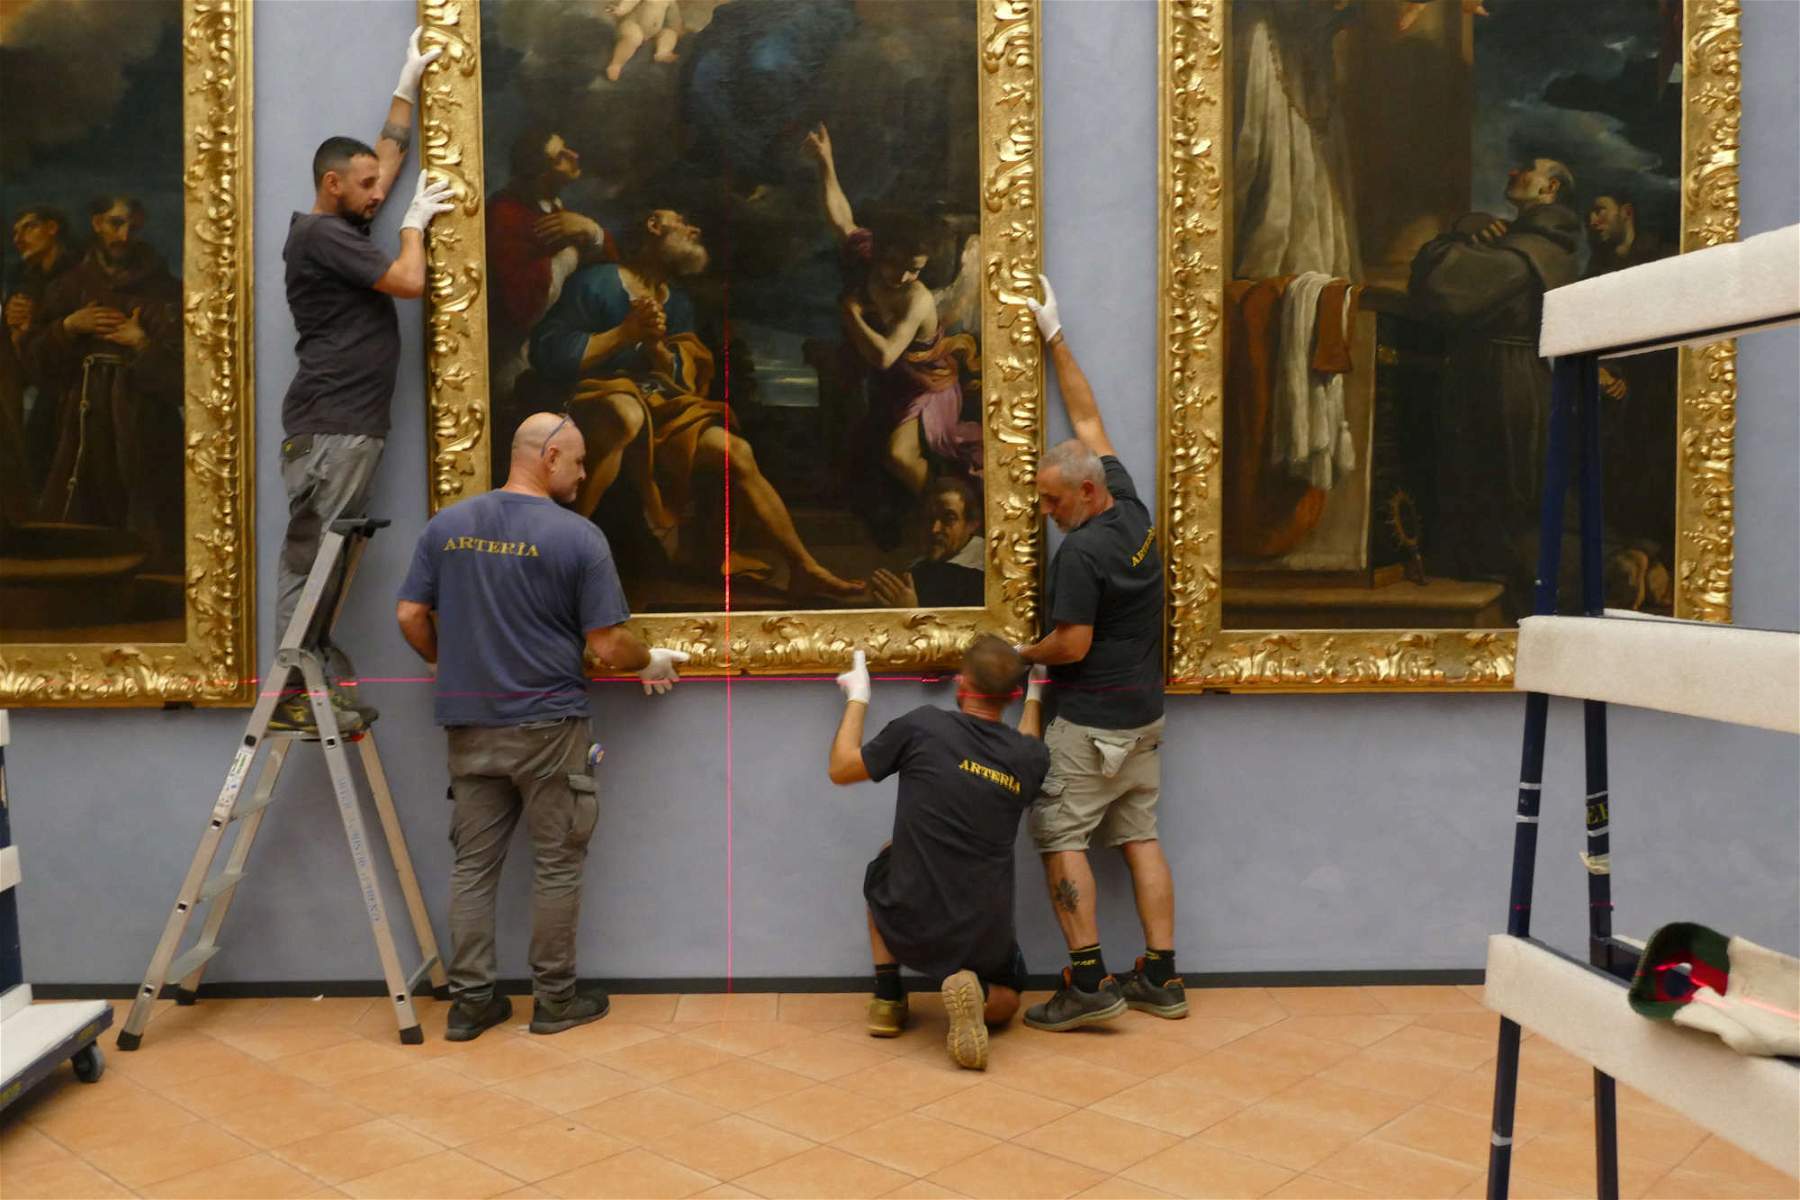 Cento, 11 years after Emilia earthquake reopens Pinacoteca Civica, home of Guercino